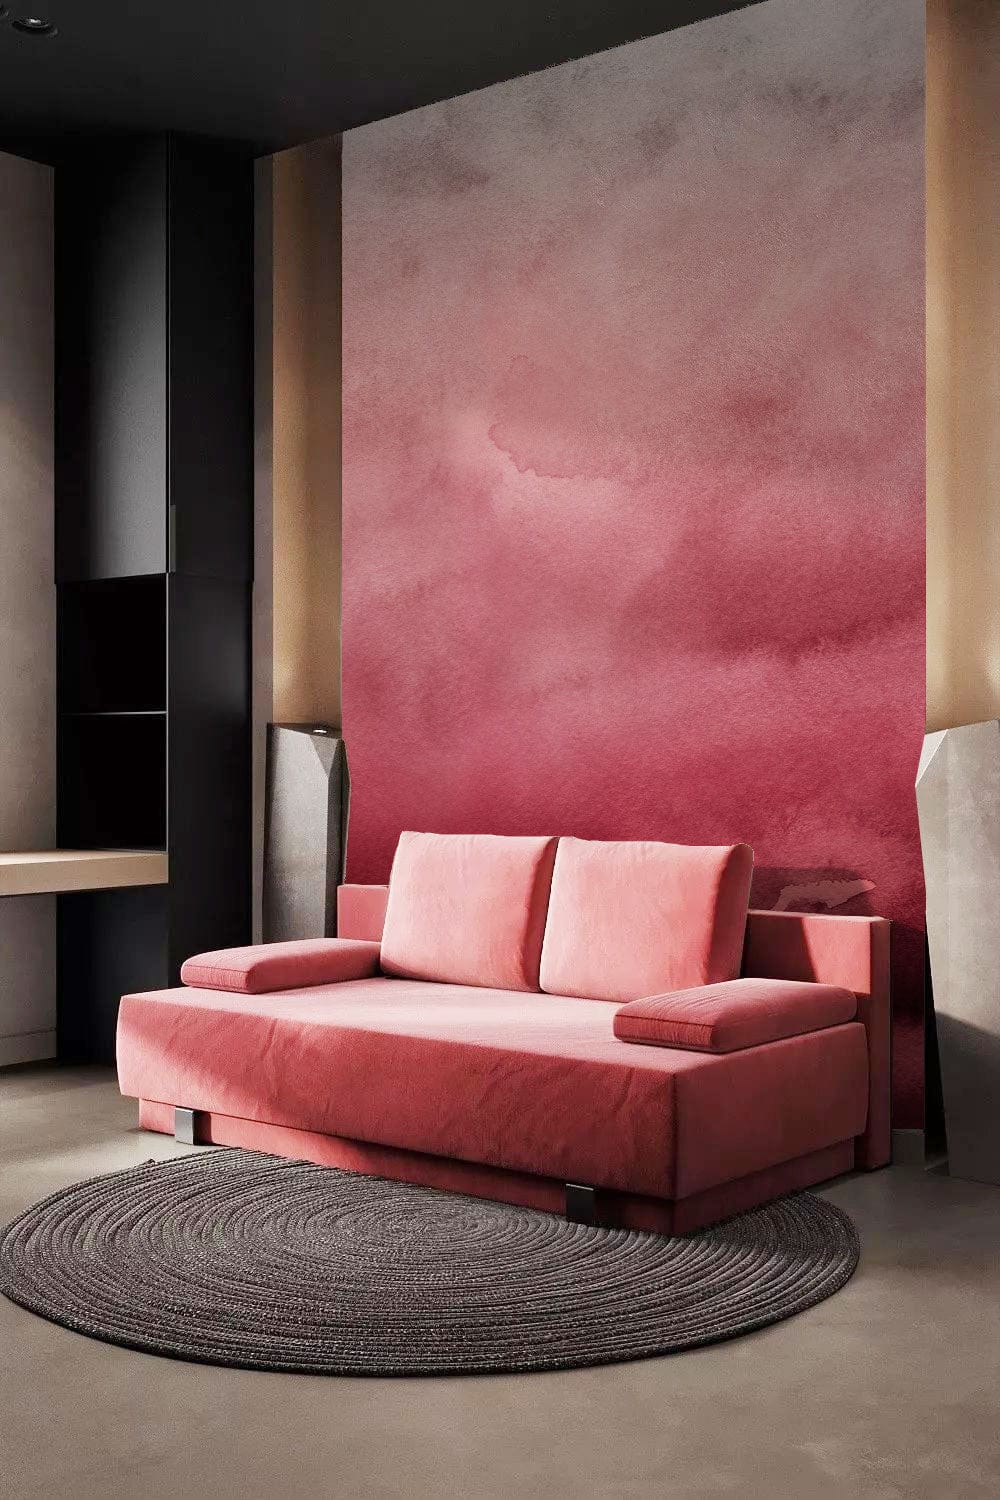 watercolor ombre pink wall mural art decor